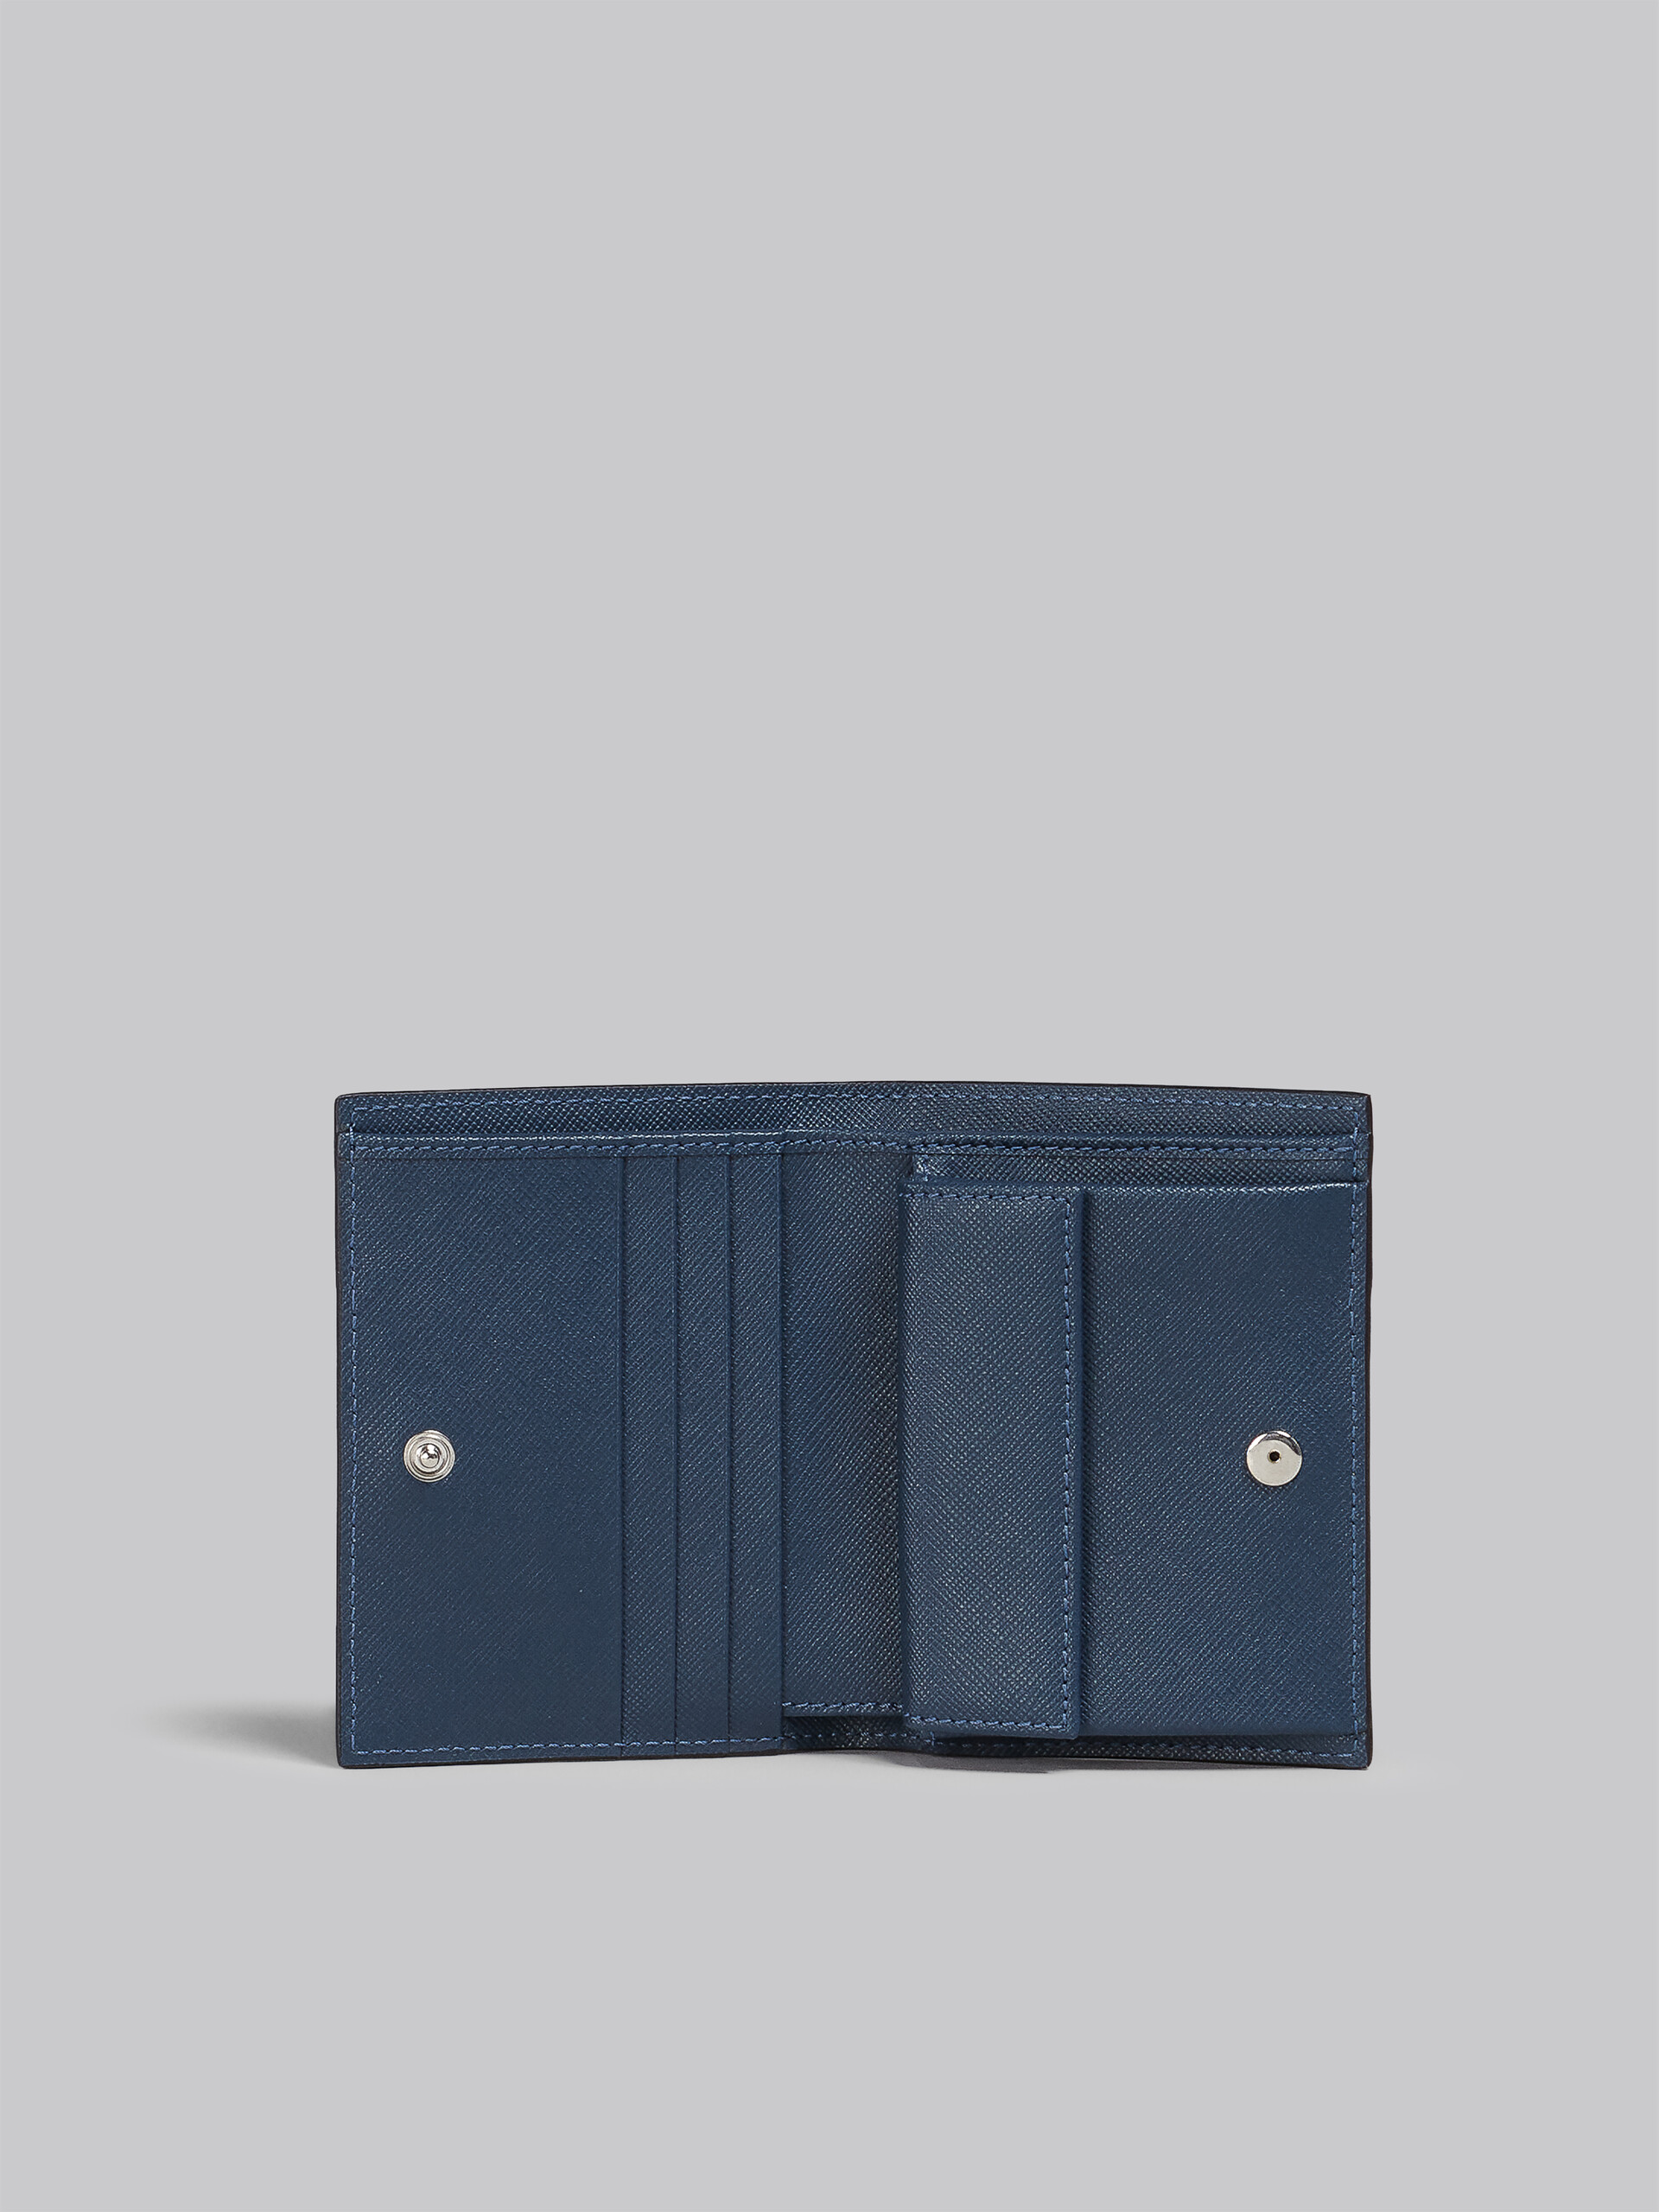 Black green and blue saffiano leather bi-fold wallet - Wallets - Image 2